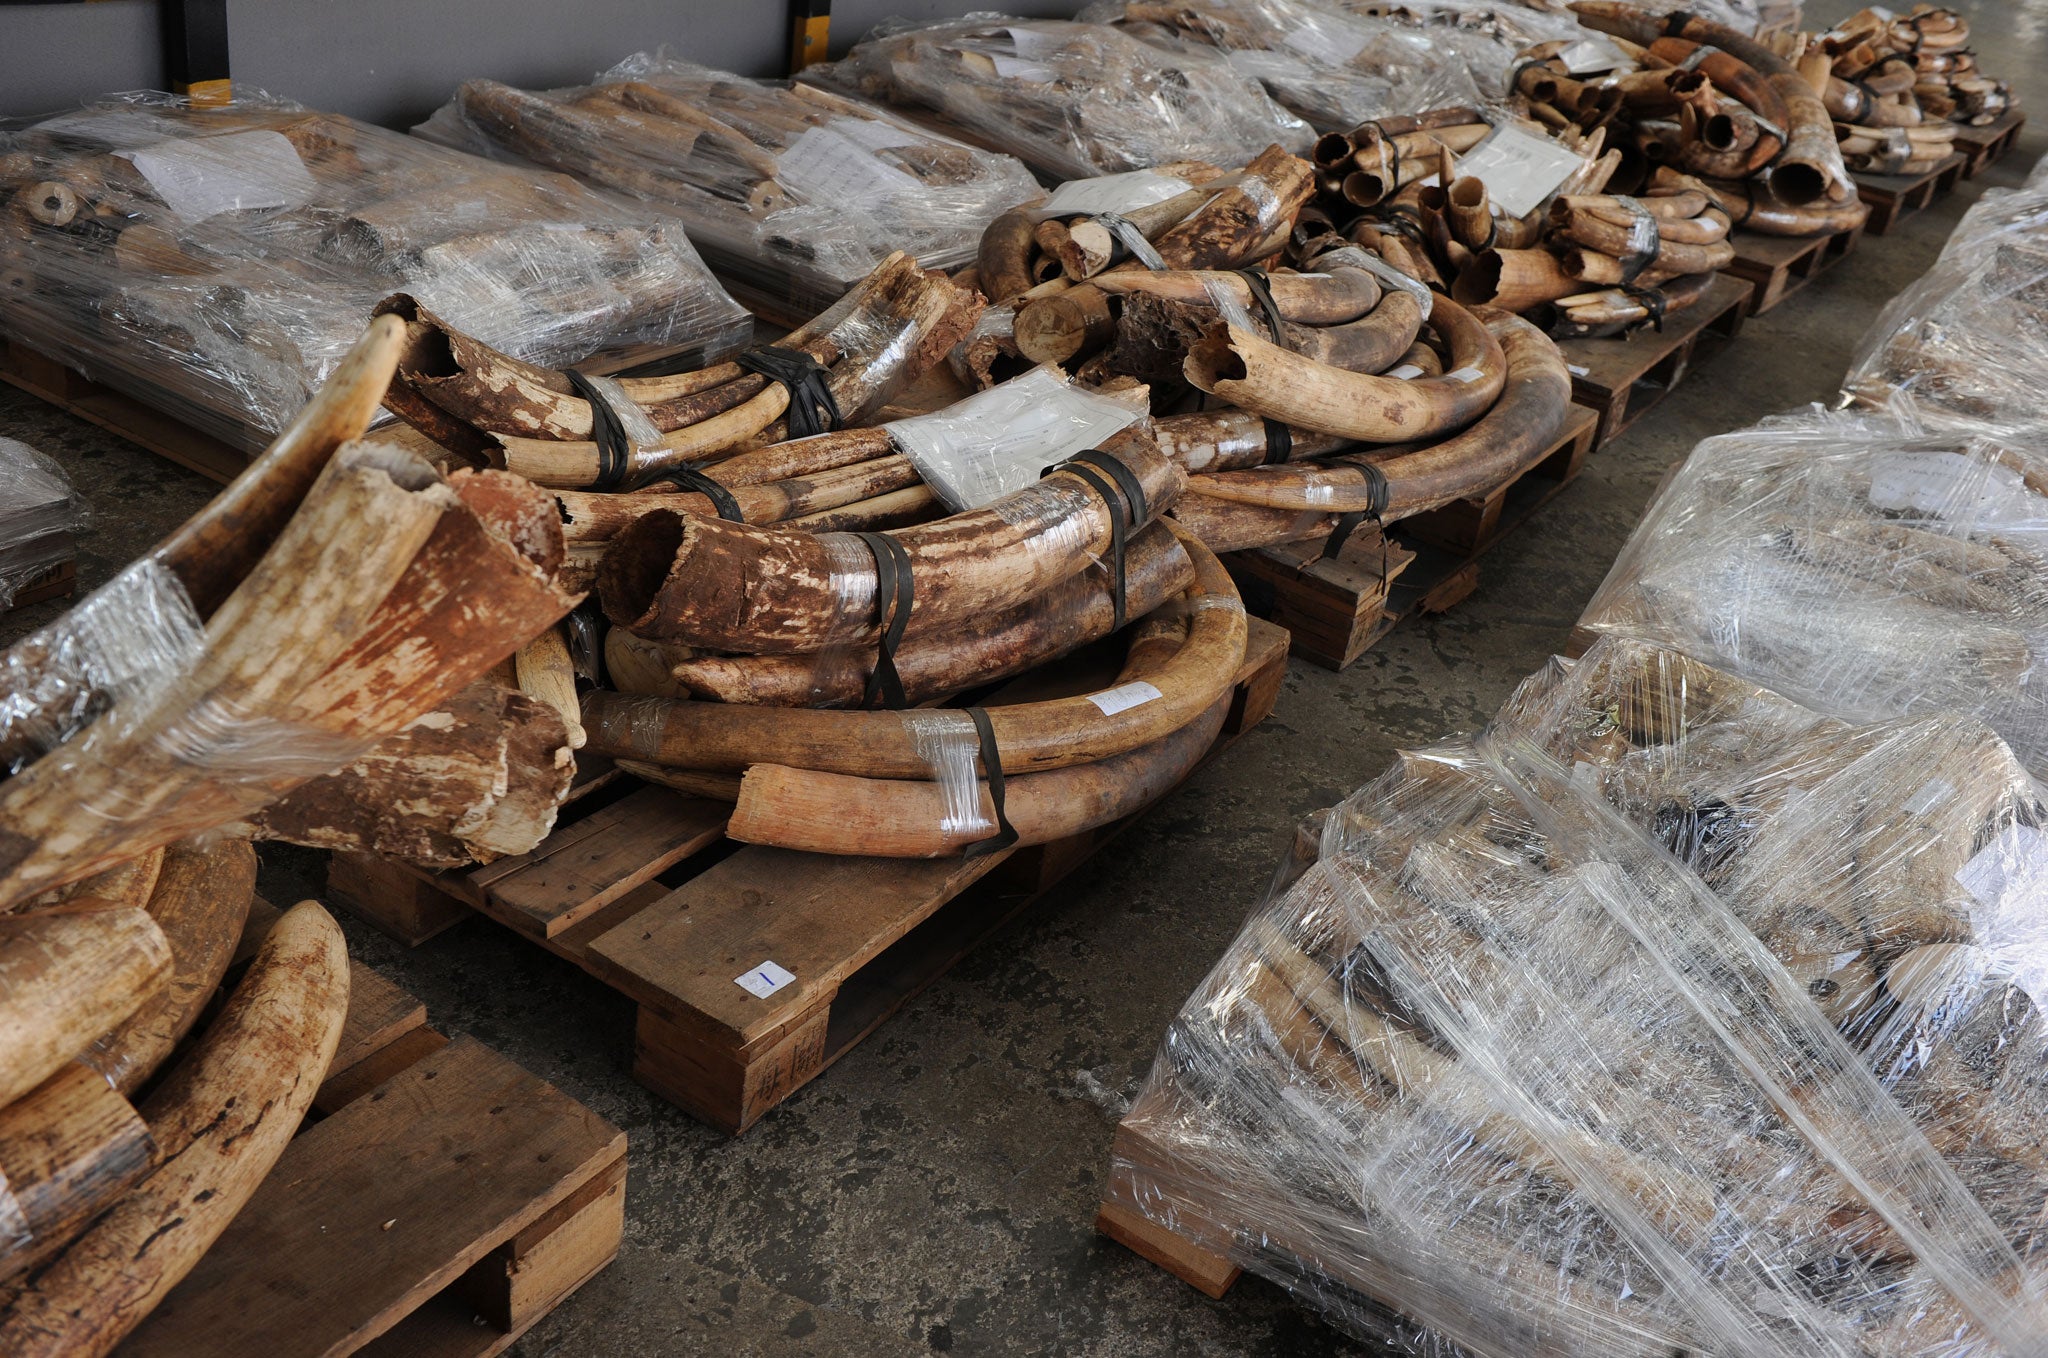 Seized ivory tusks are displayed in Hong Kong